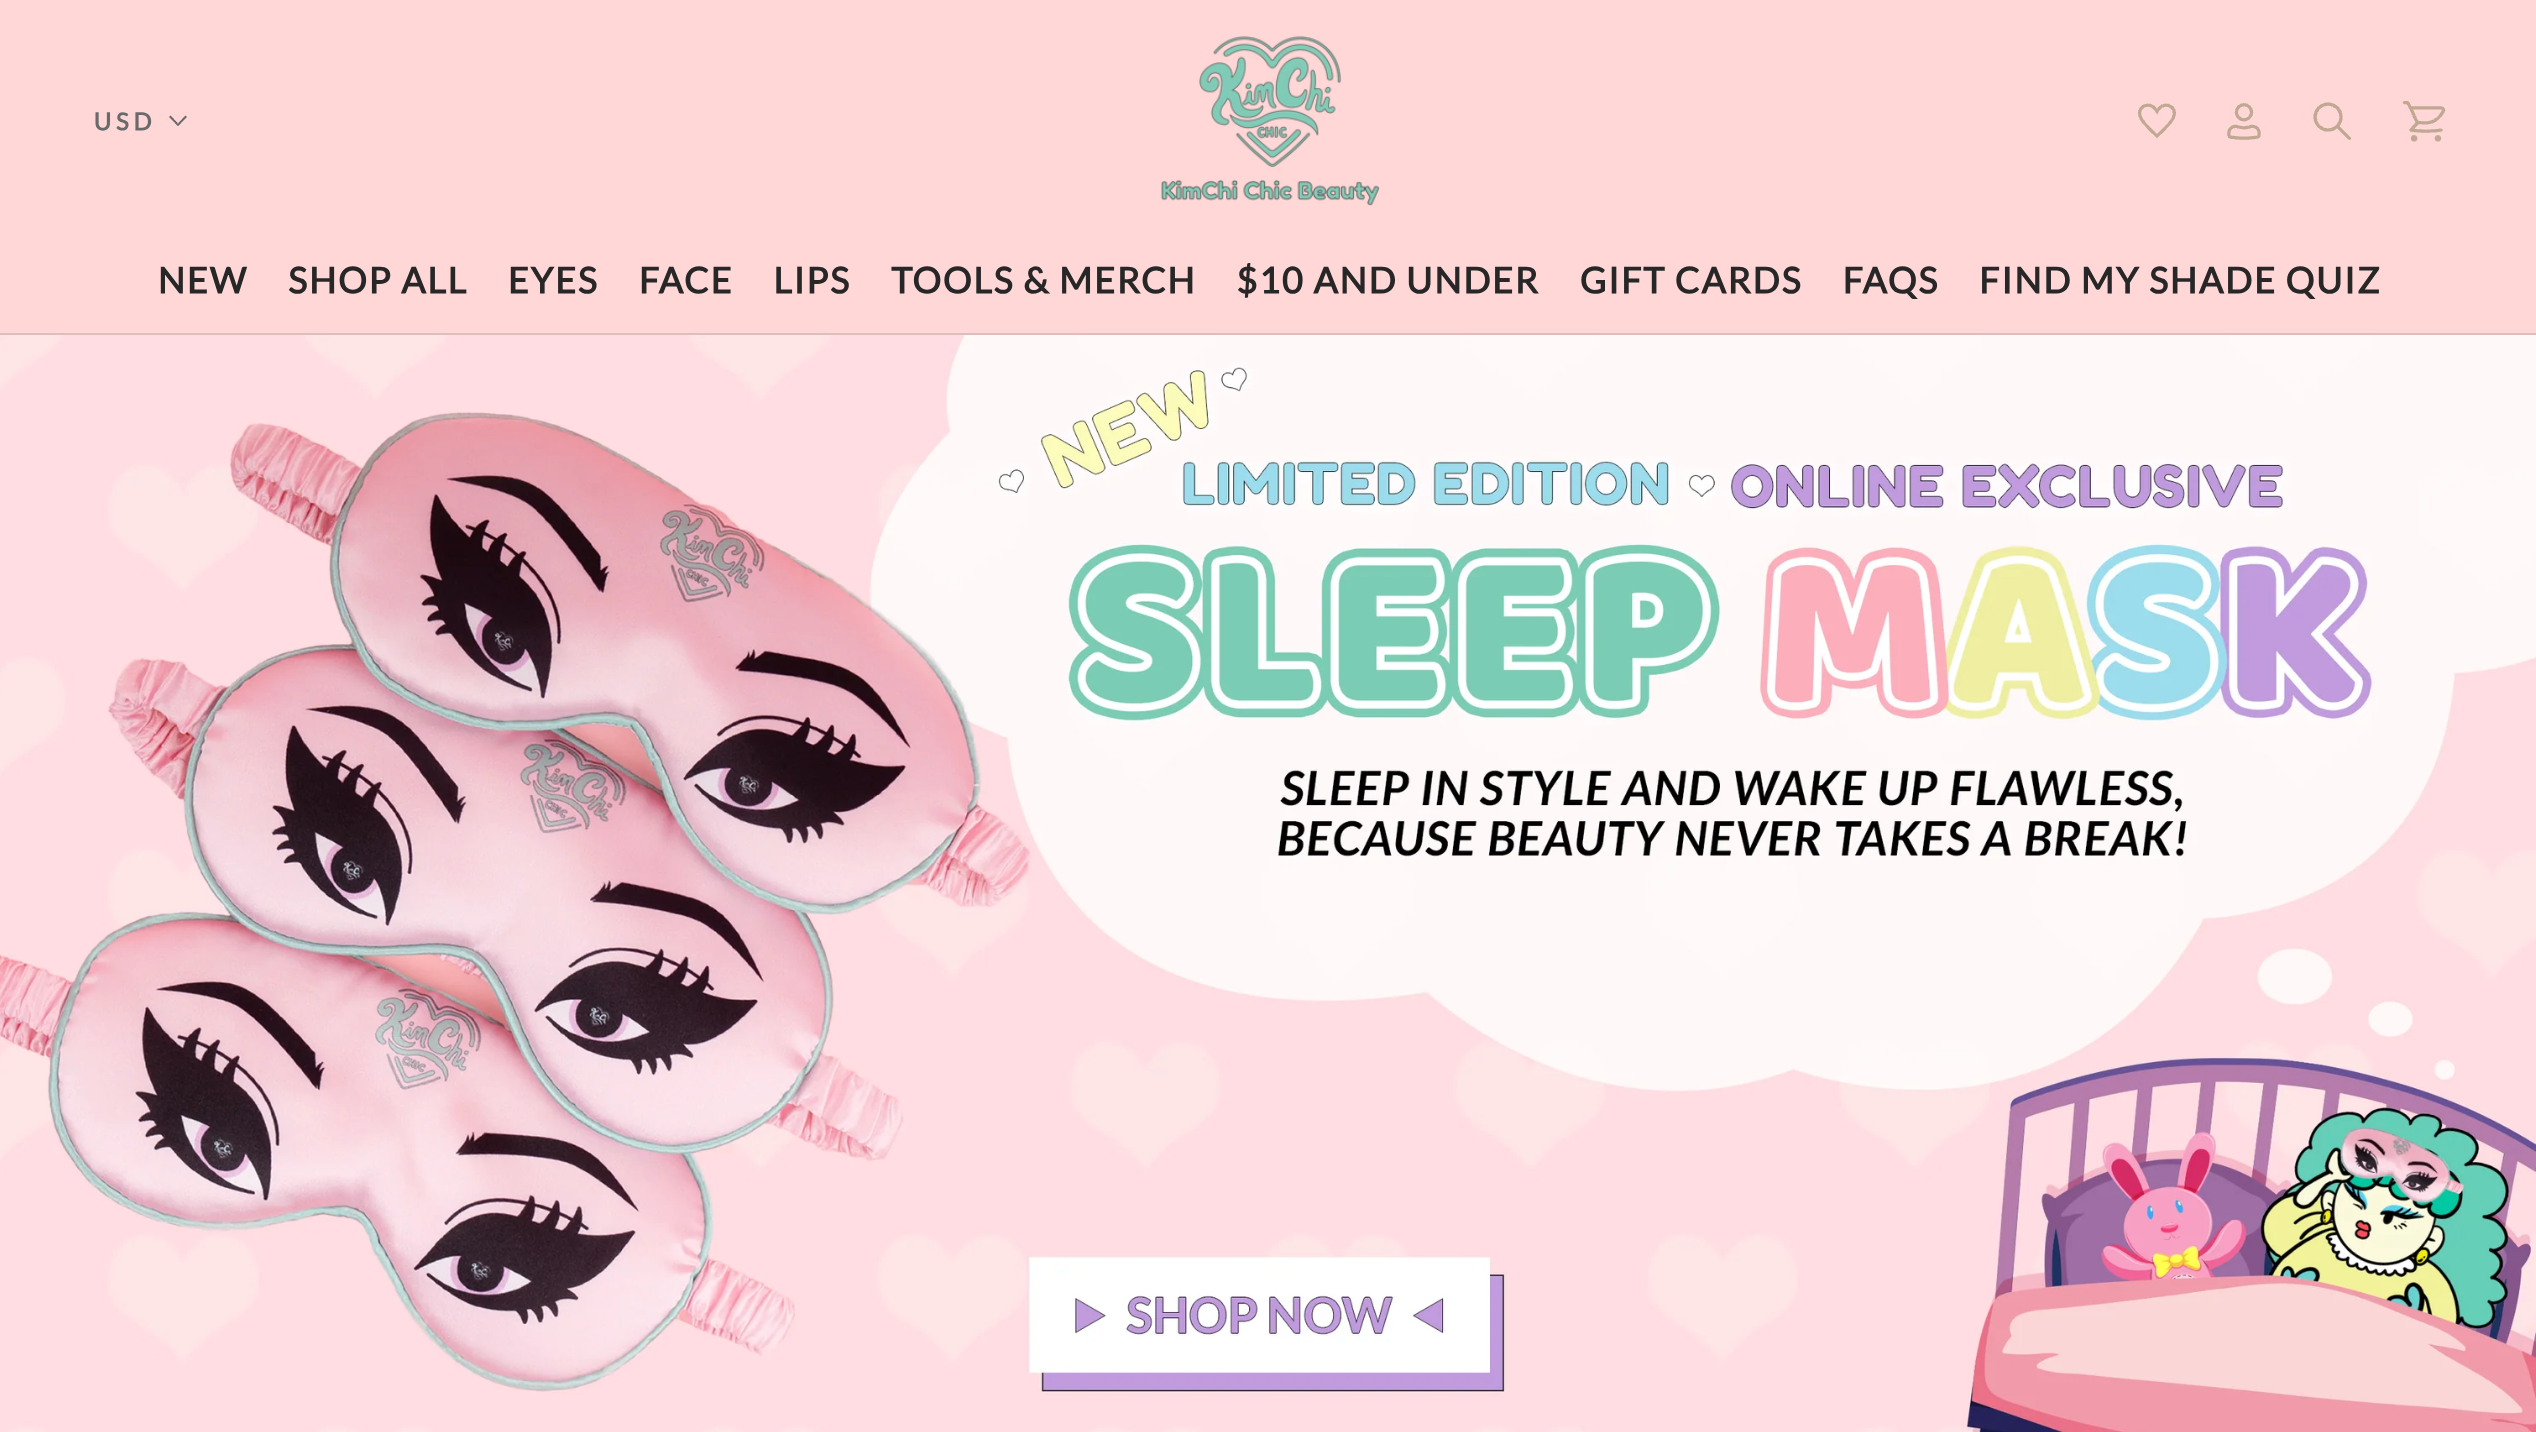 Ecommerce homepage for brand Kim Chi Chic Beauty